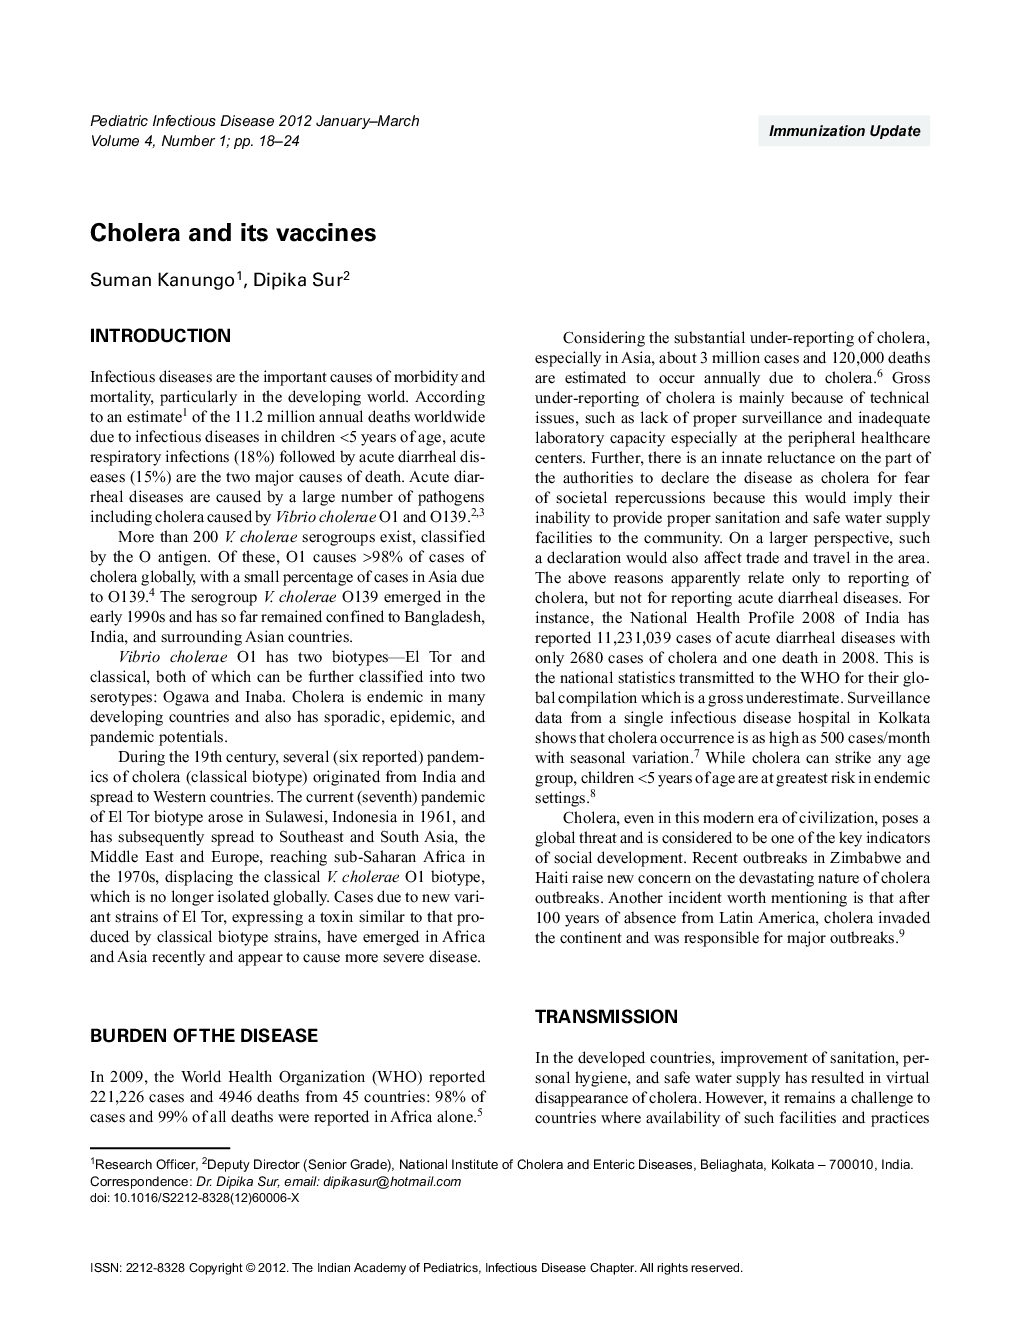 Cholera and its vaccines